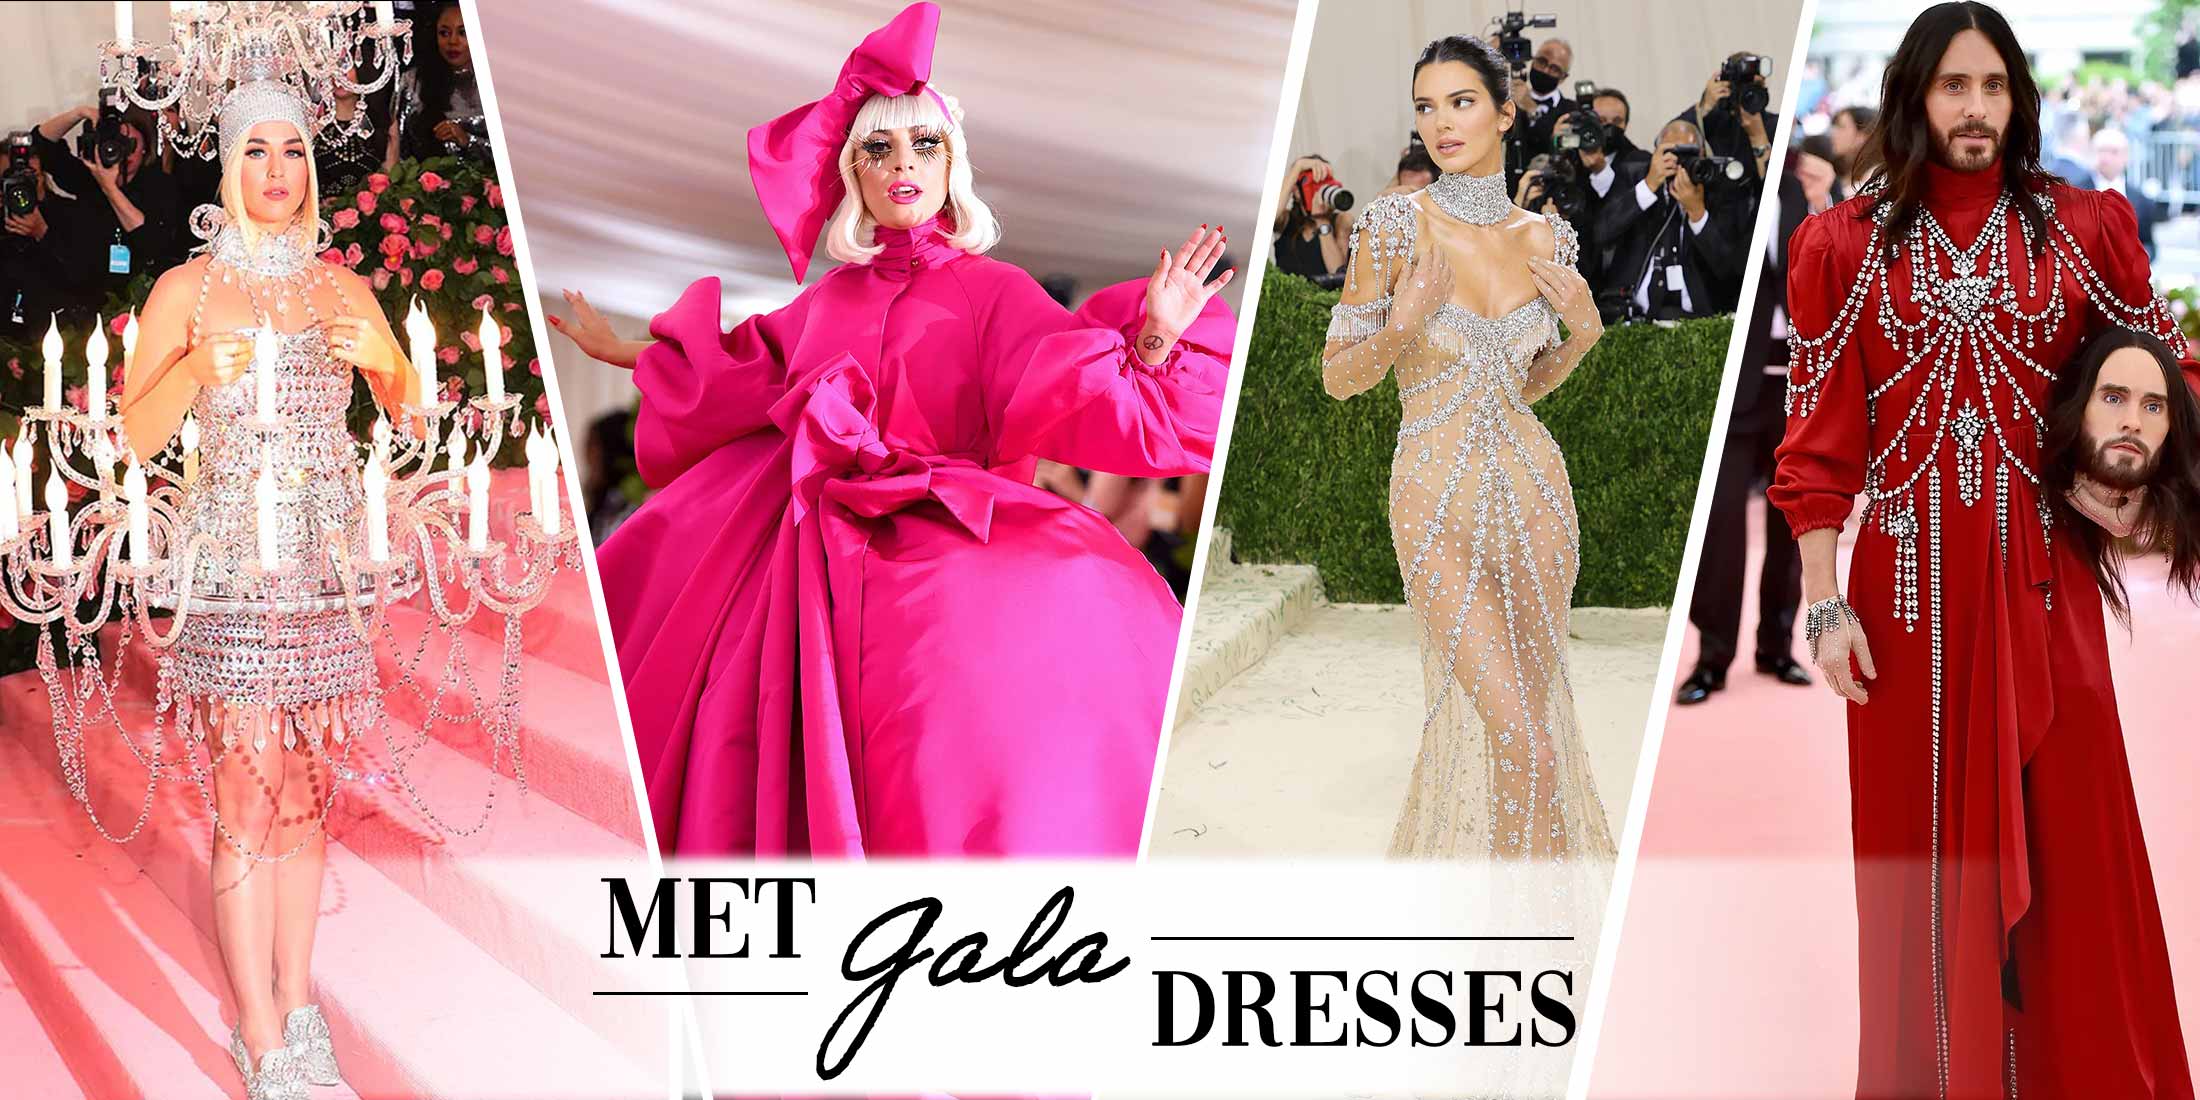 Top 10 Best Met Gala Dresses of All Time Iconic Met Gala Outfits